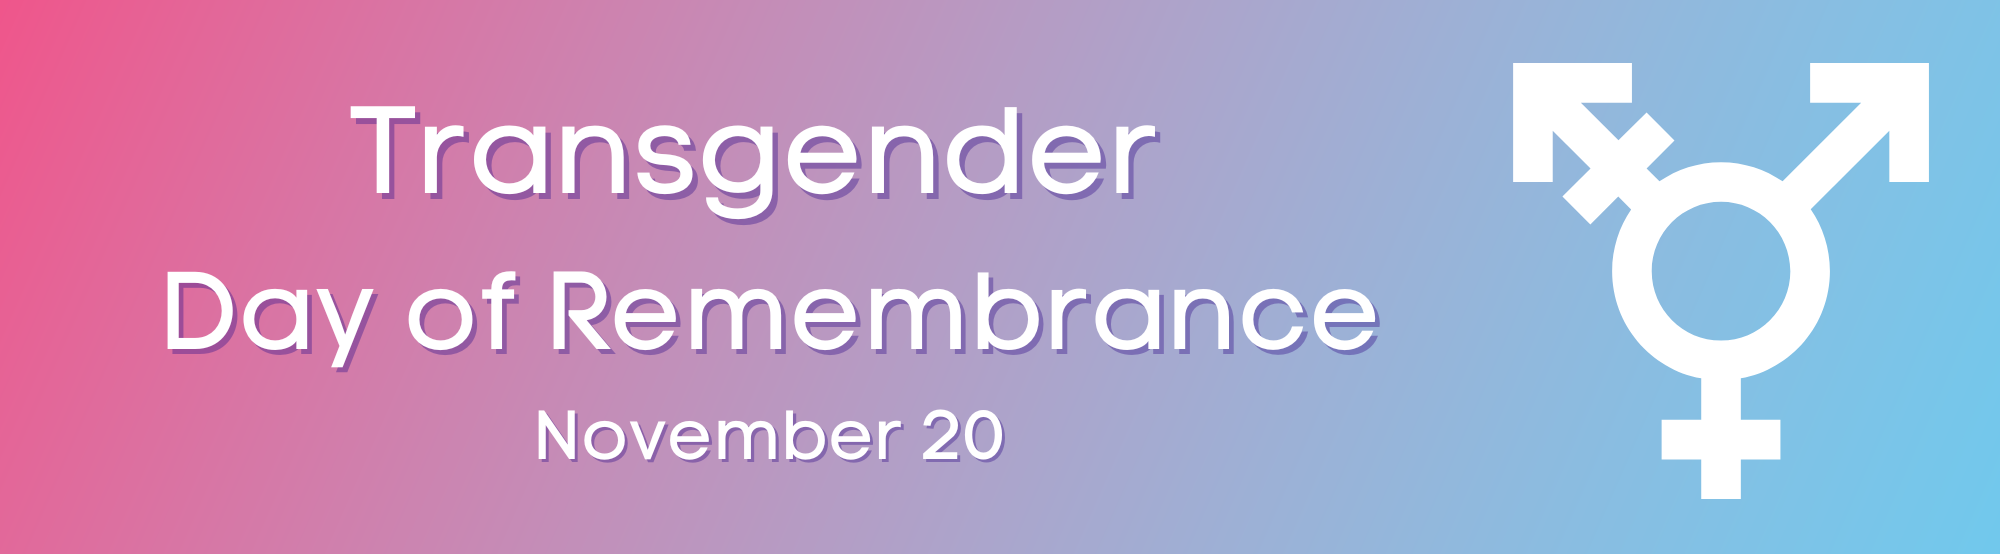 Decorative heading with the text: Transgender Day of Remembrance November 20